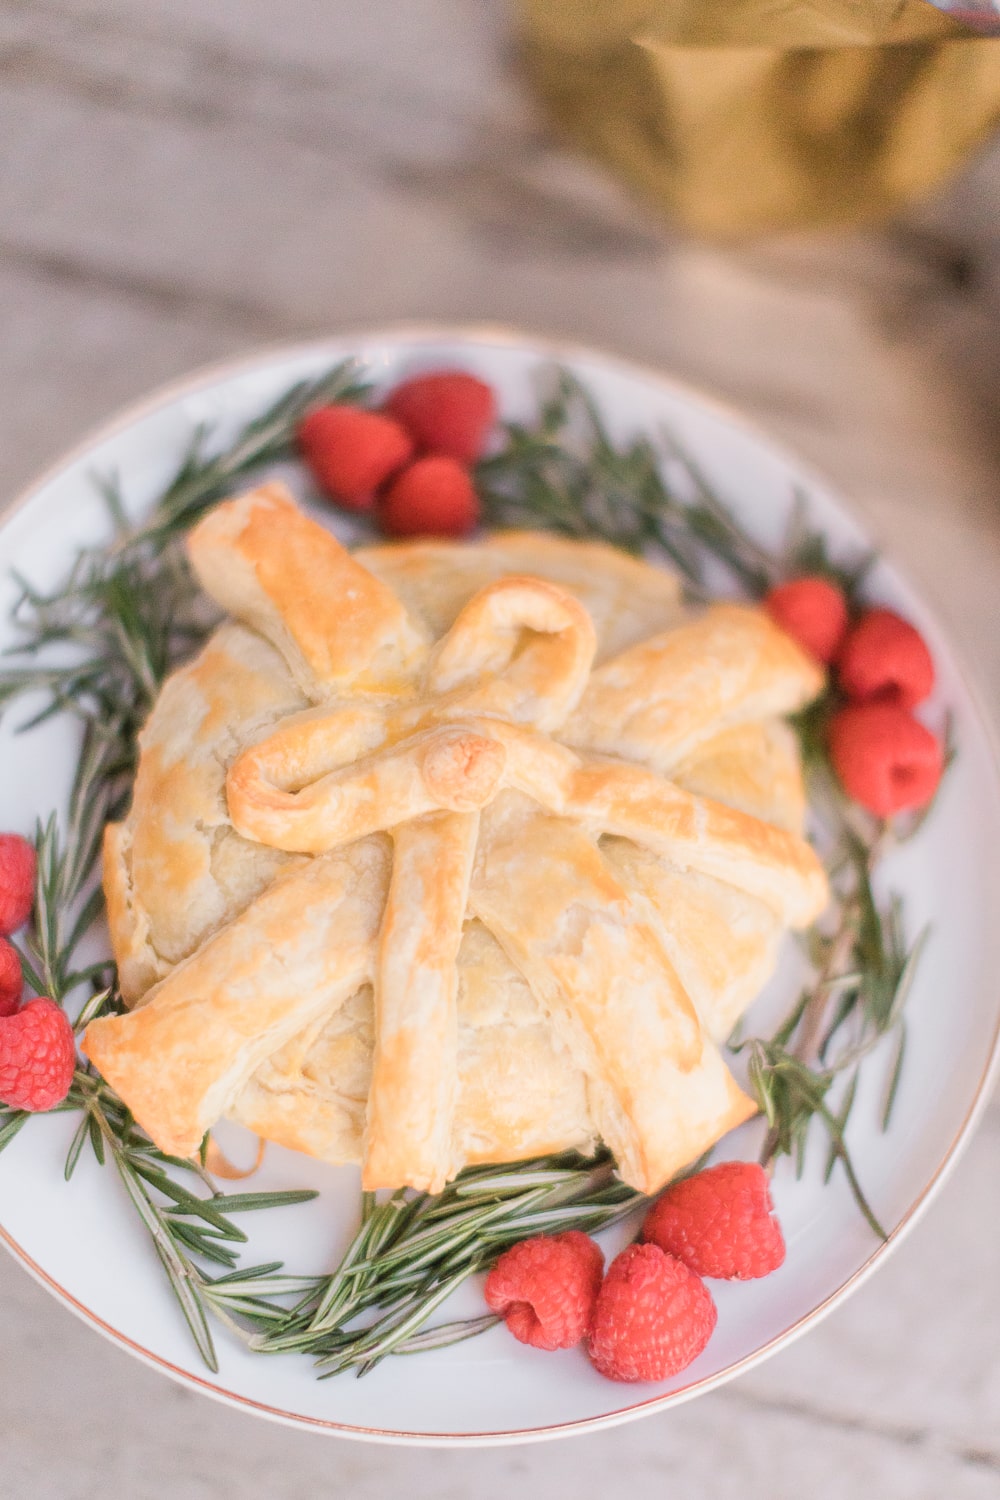 Blogger Stephanie Ziajka shares some ideas for what to serve with baked brie on Diary of a Debutante